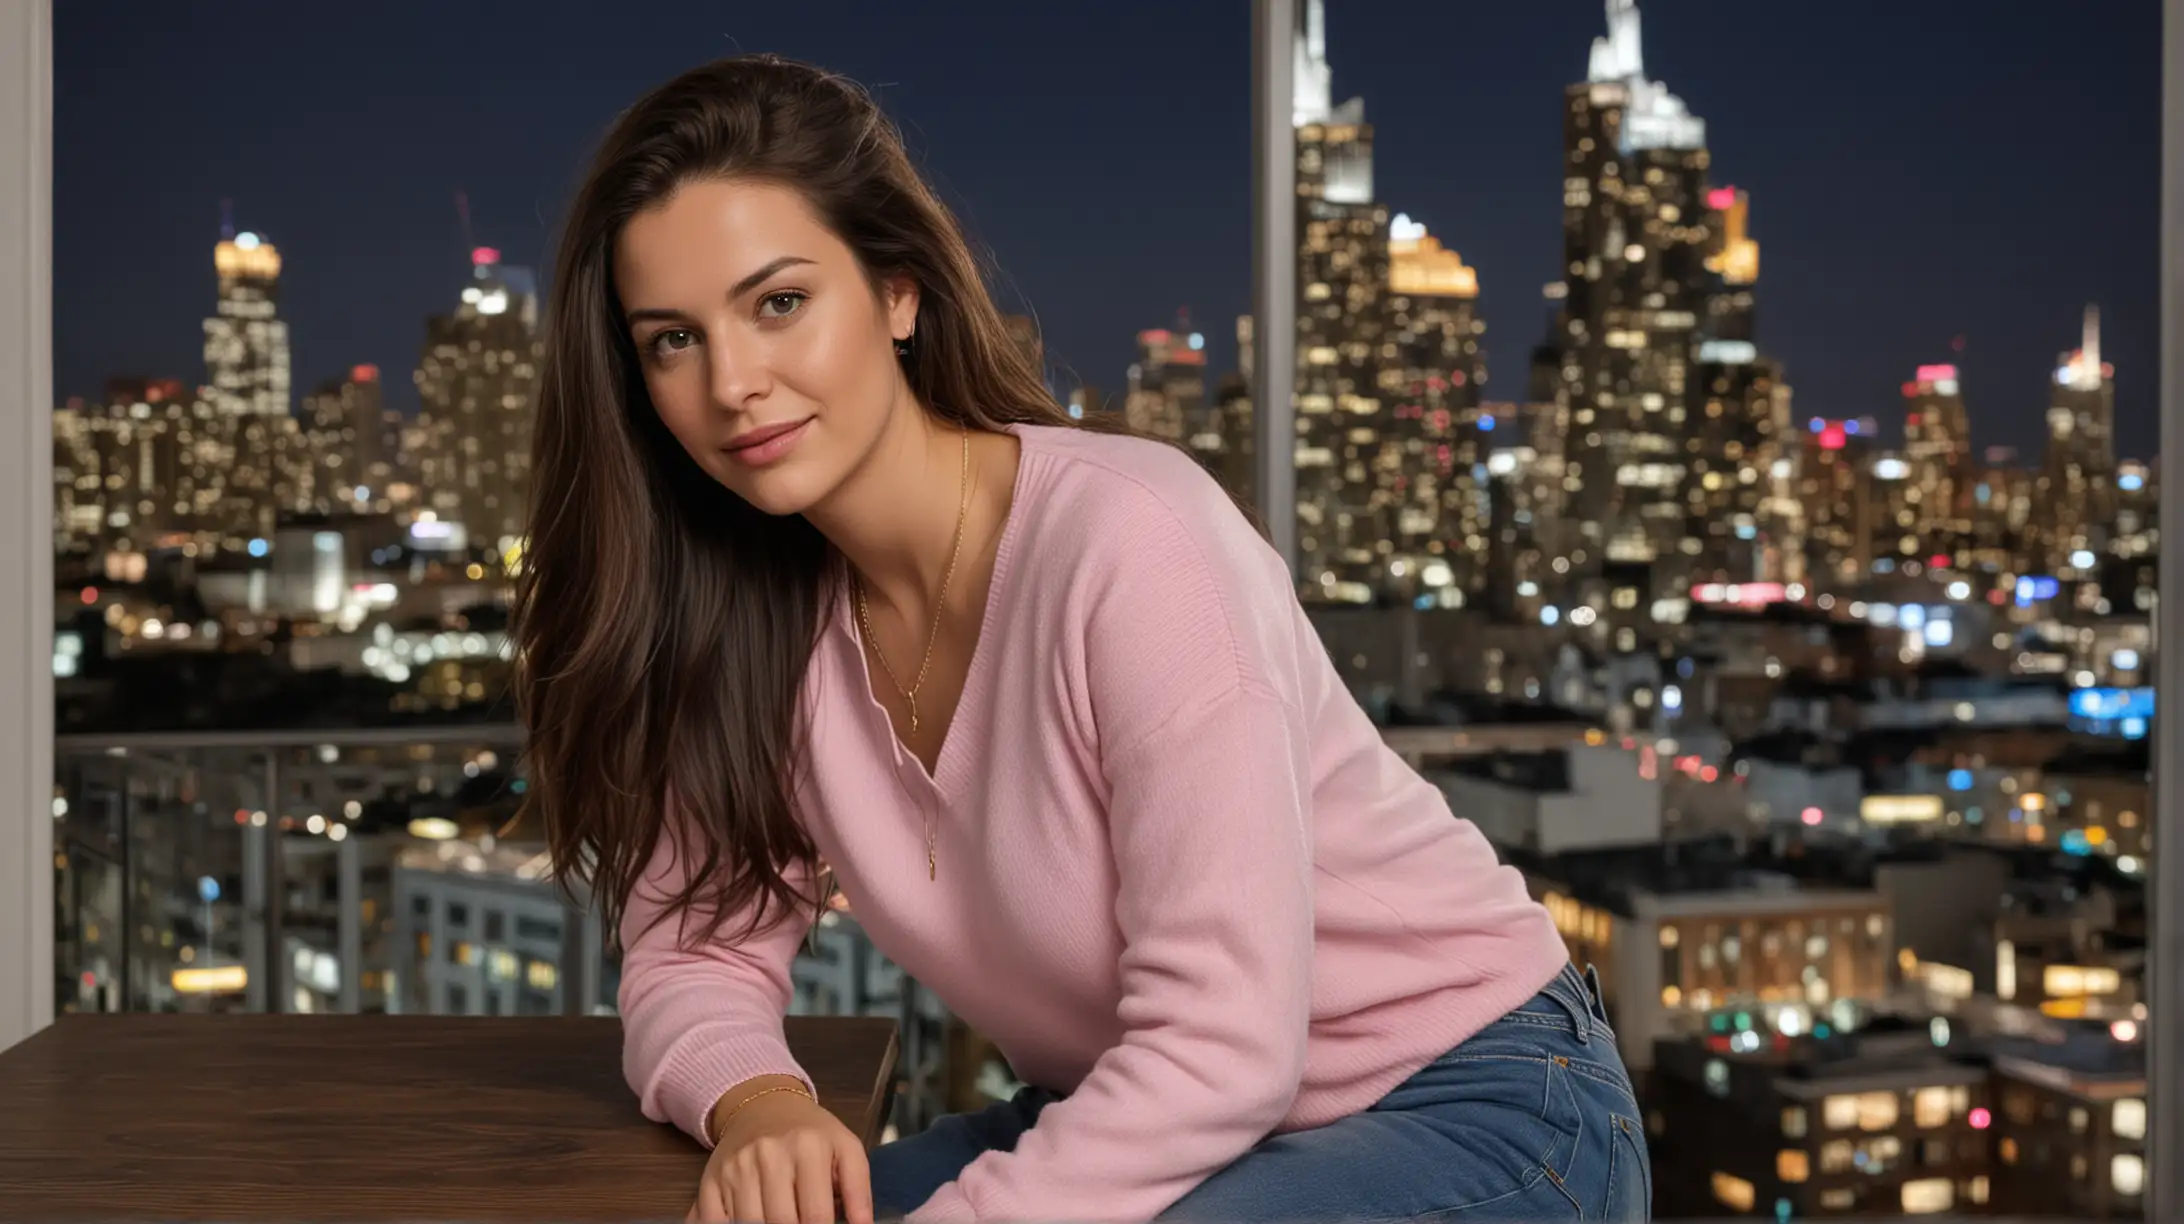 30 year old white woman with long dark brown hair parted to the right, gold necklace, pink sweater, white T-shirt and blue jeans. She is sitting down at a table, modern apartment at night with high rise urban background.